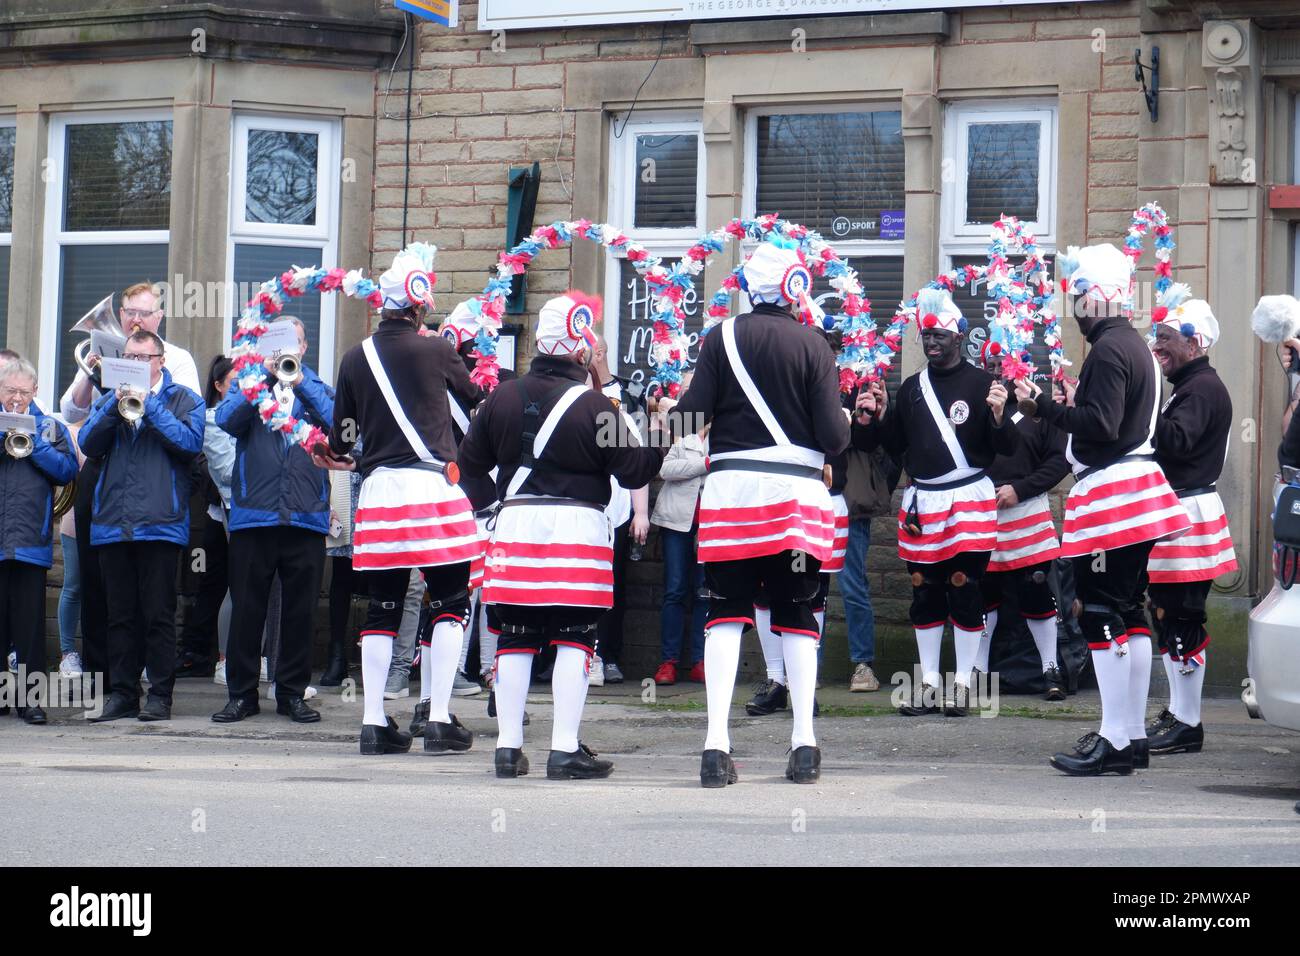 The Britannia Coconutters perform their annual perambulation of the town of Bacup in Lancashire outside the George & Dragon pub on Easter Saturday Stock Photo